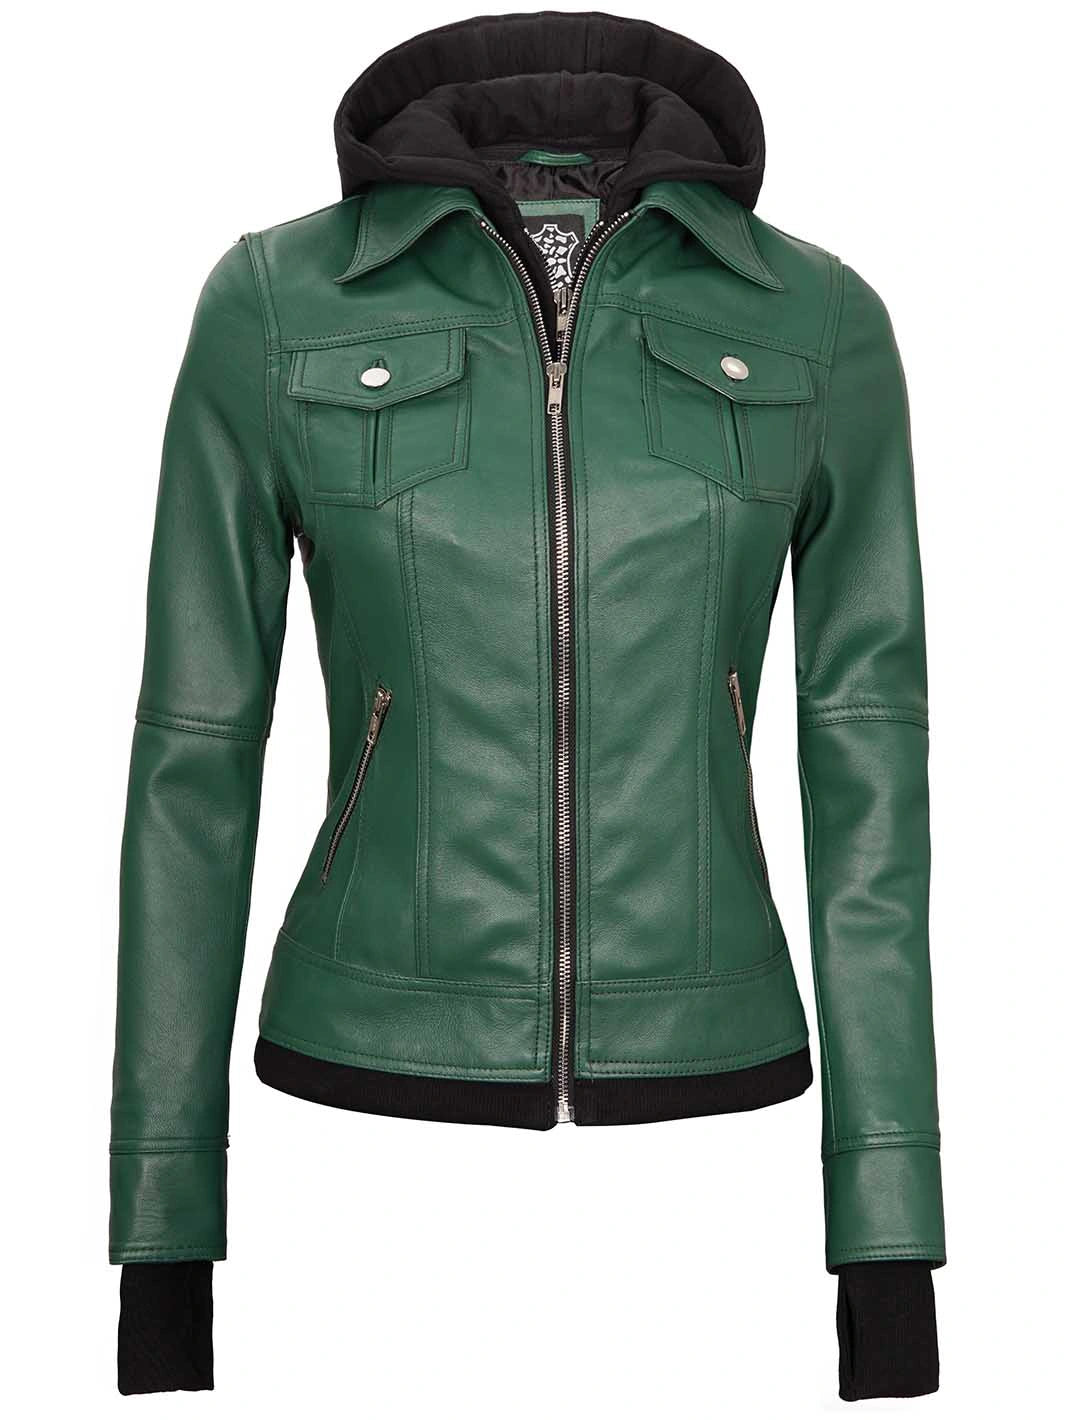 Green leather jacket with hood